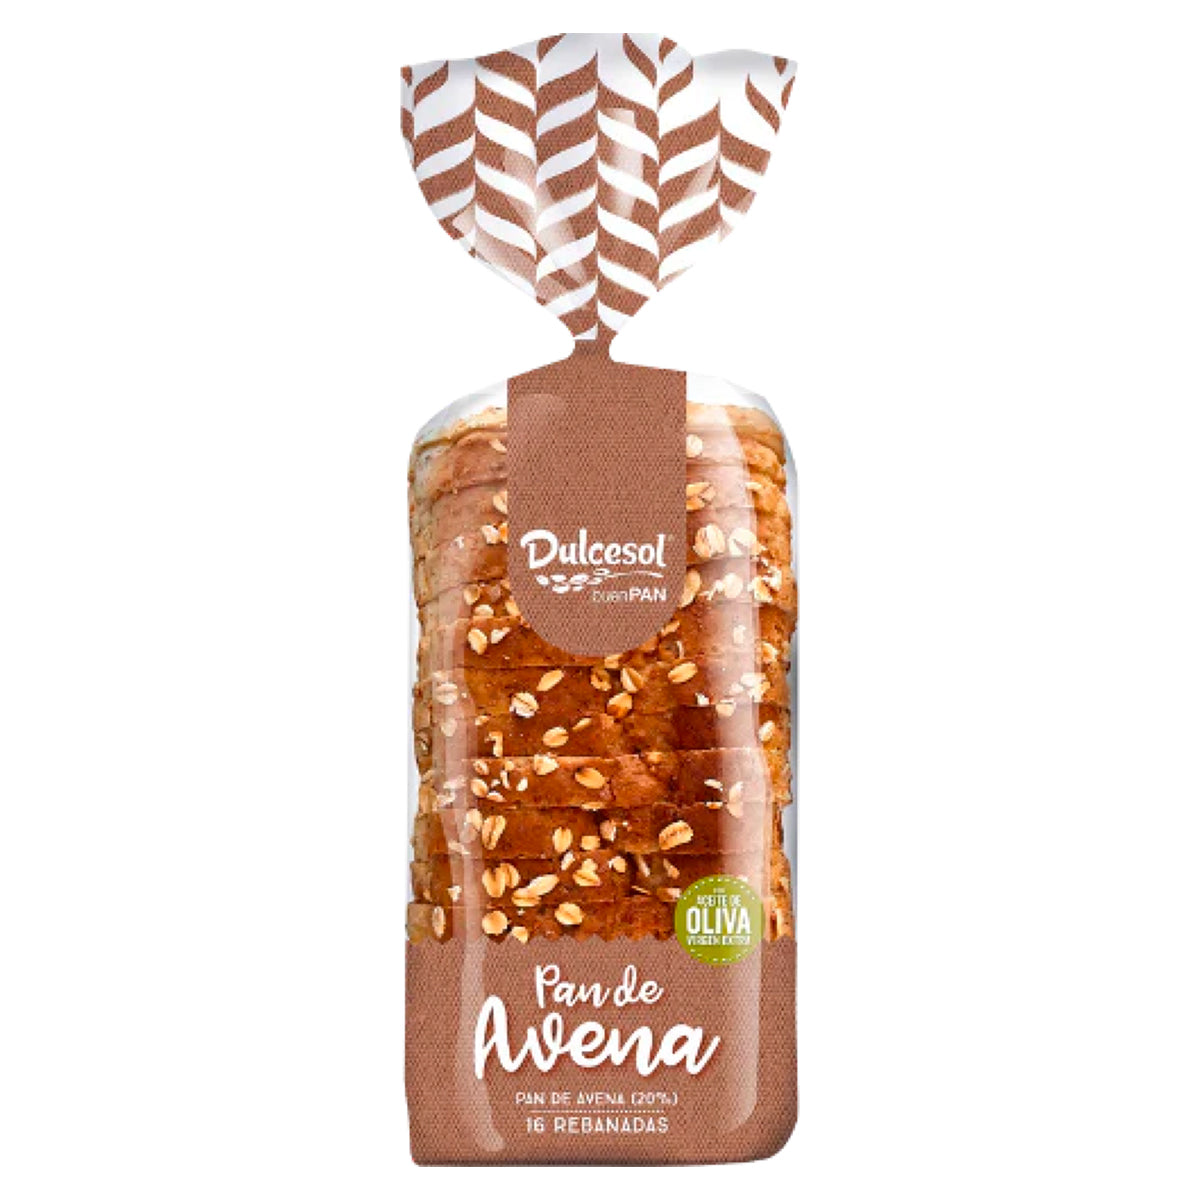 A bag of Dulcesol - Oatmeal Bread - 460g with a brown and white pattern.